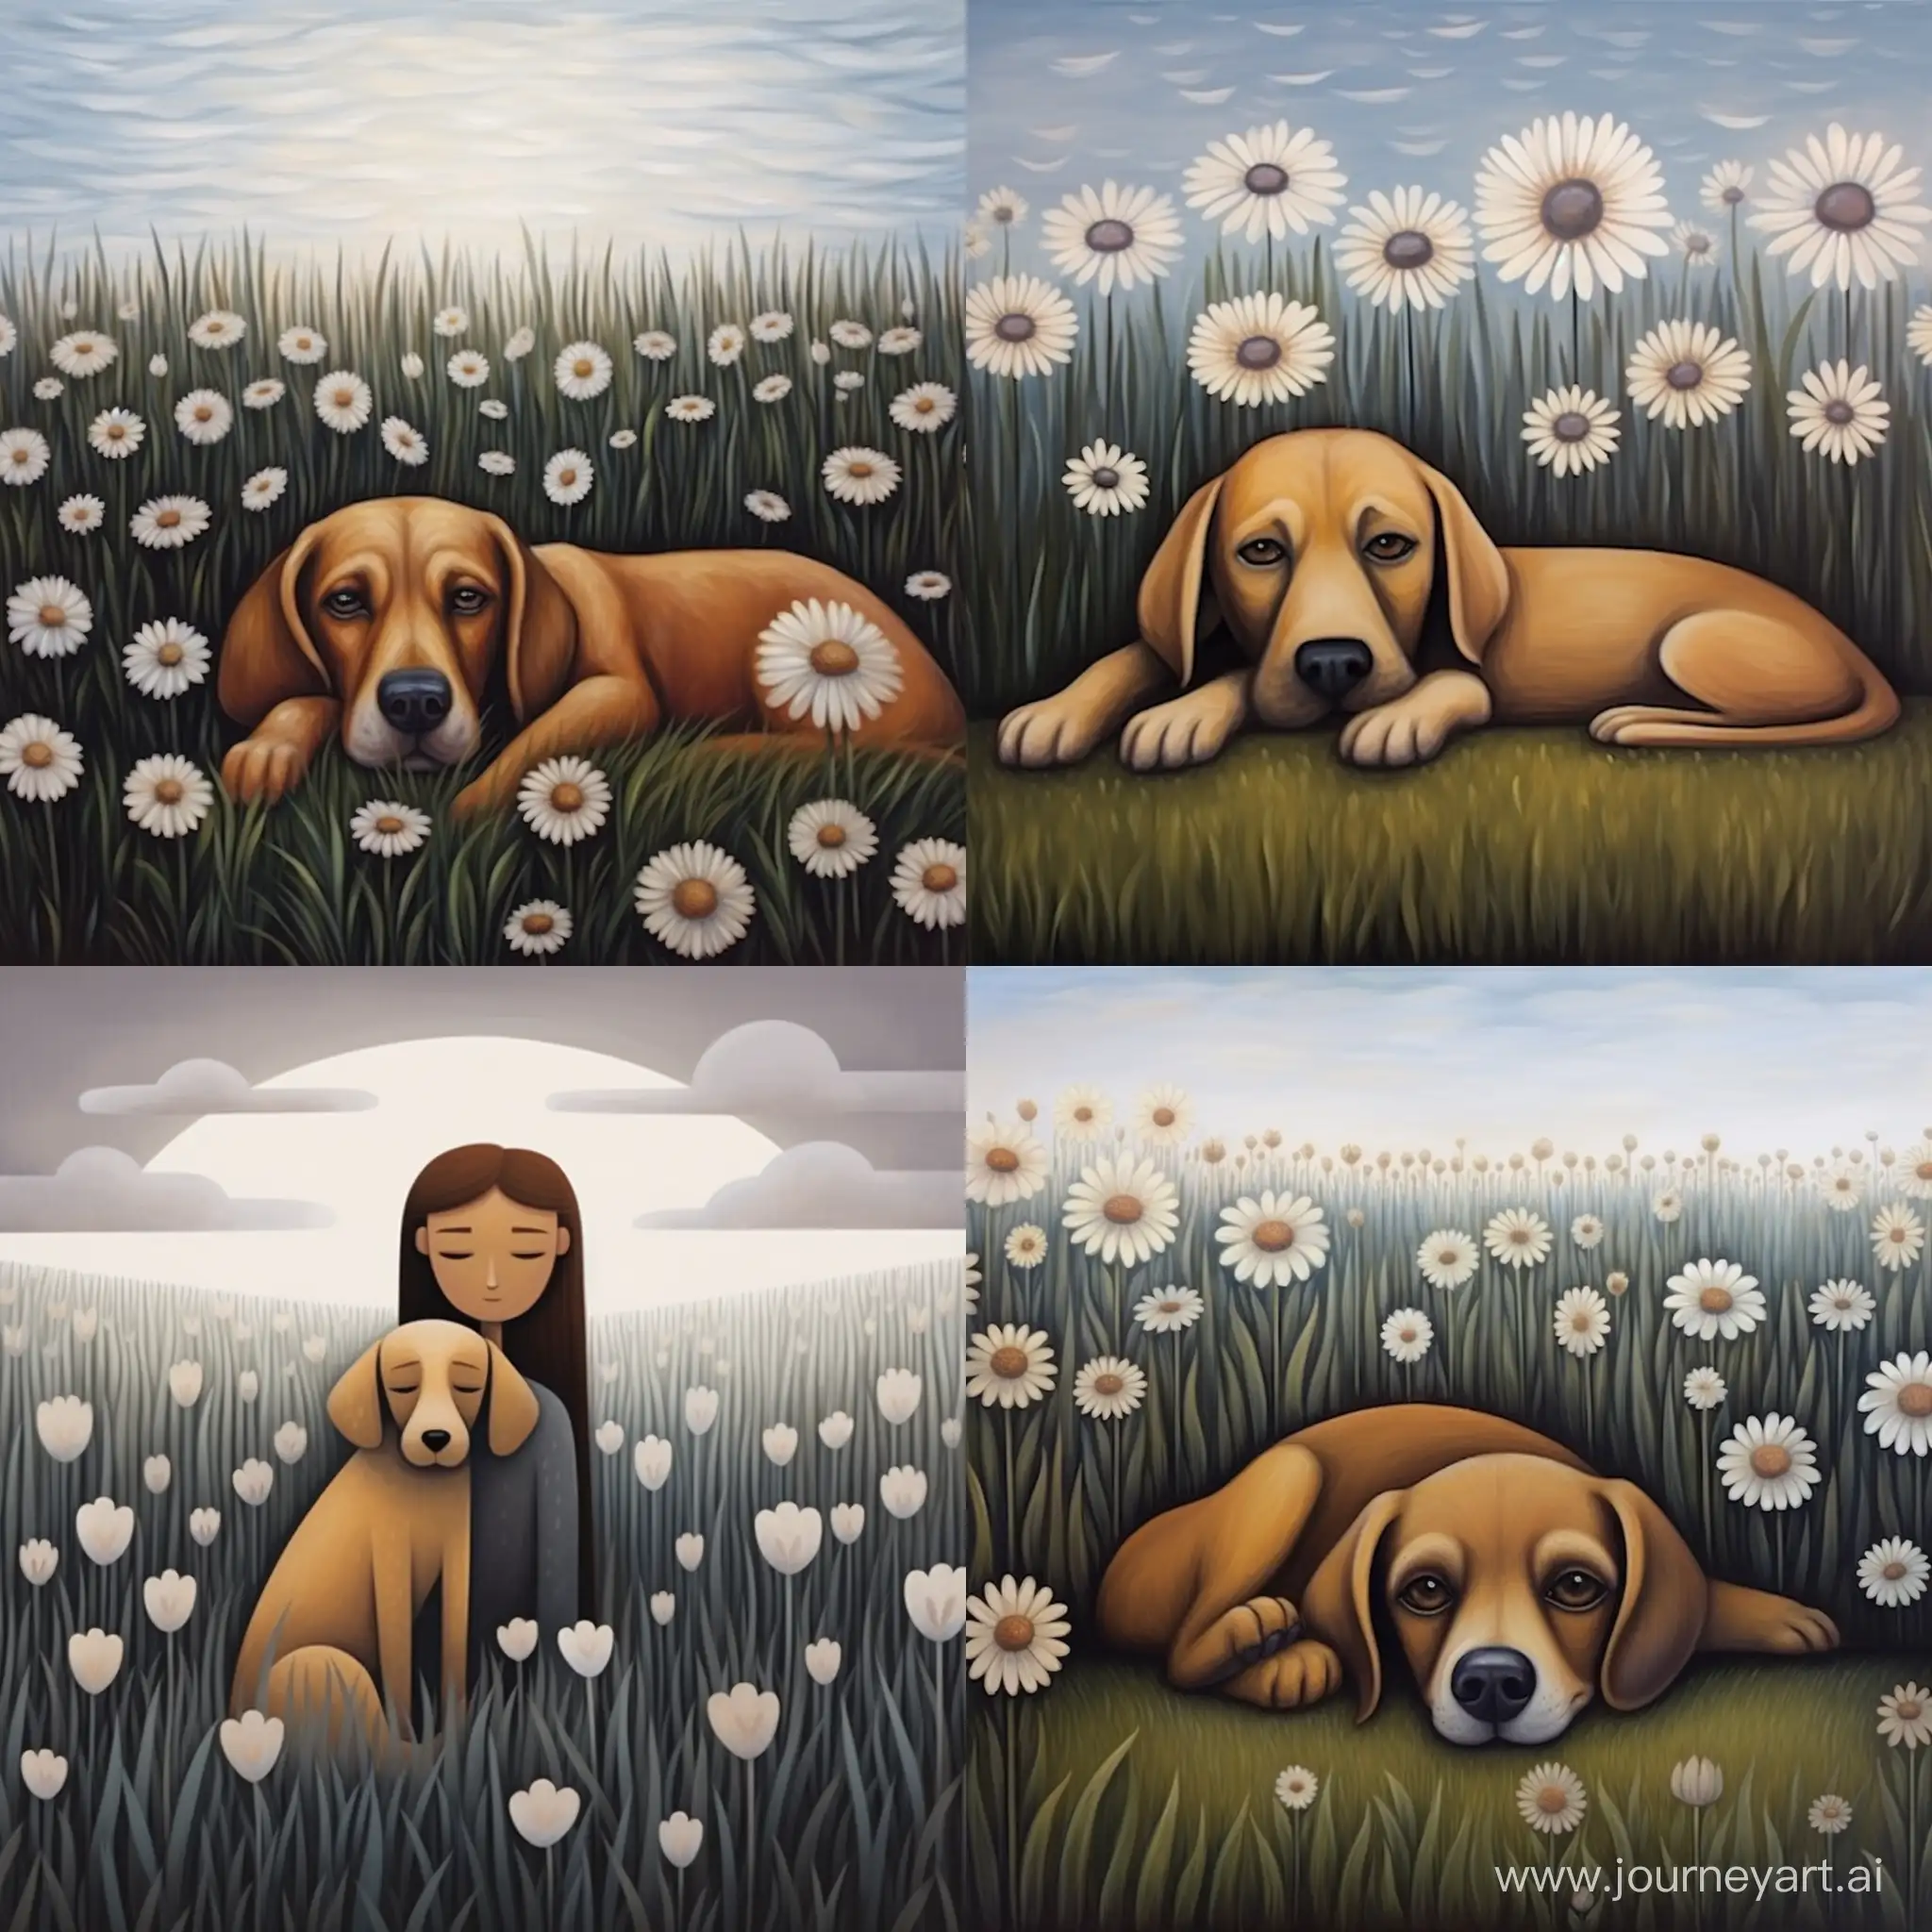 Graceful-Girl-and-Loyal-Dog-in-a-Meadow-of-Daisies